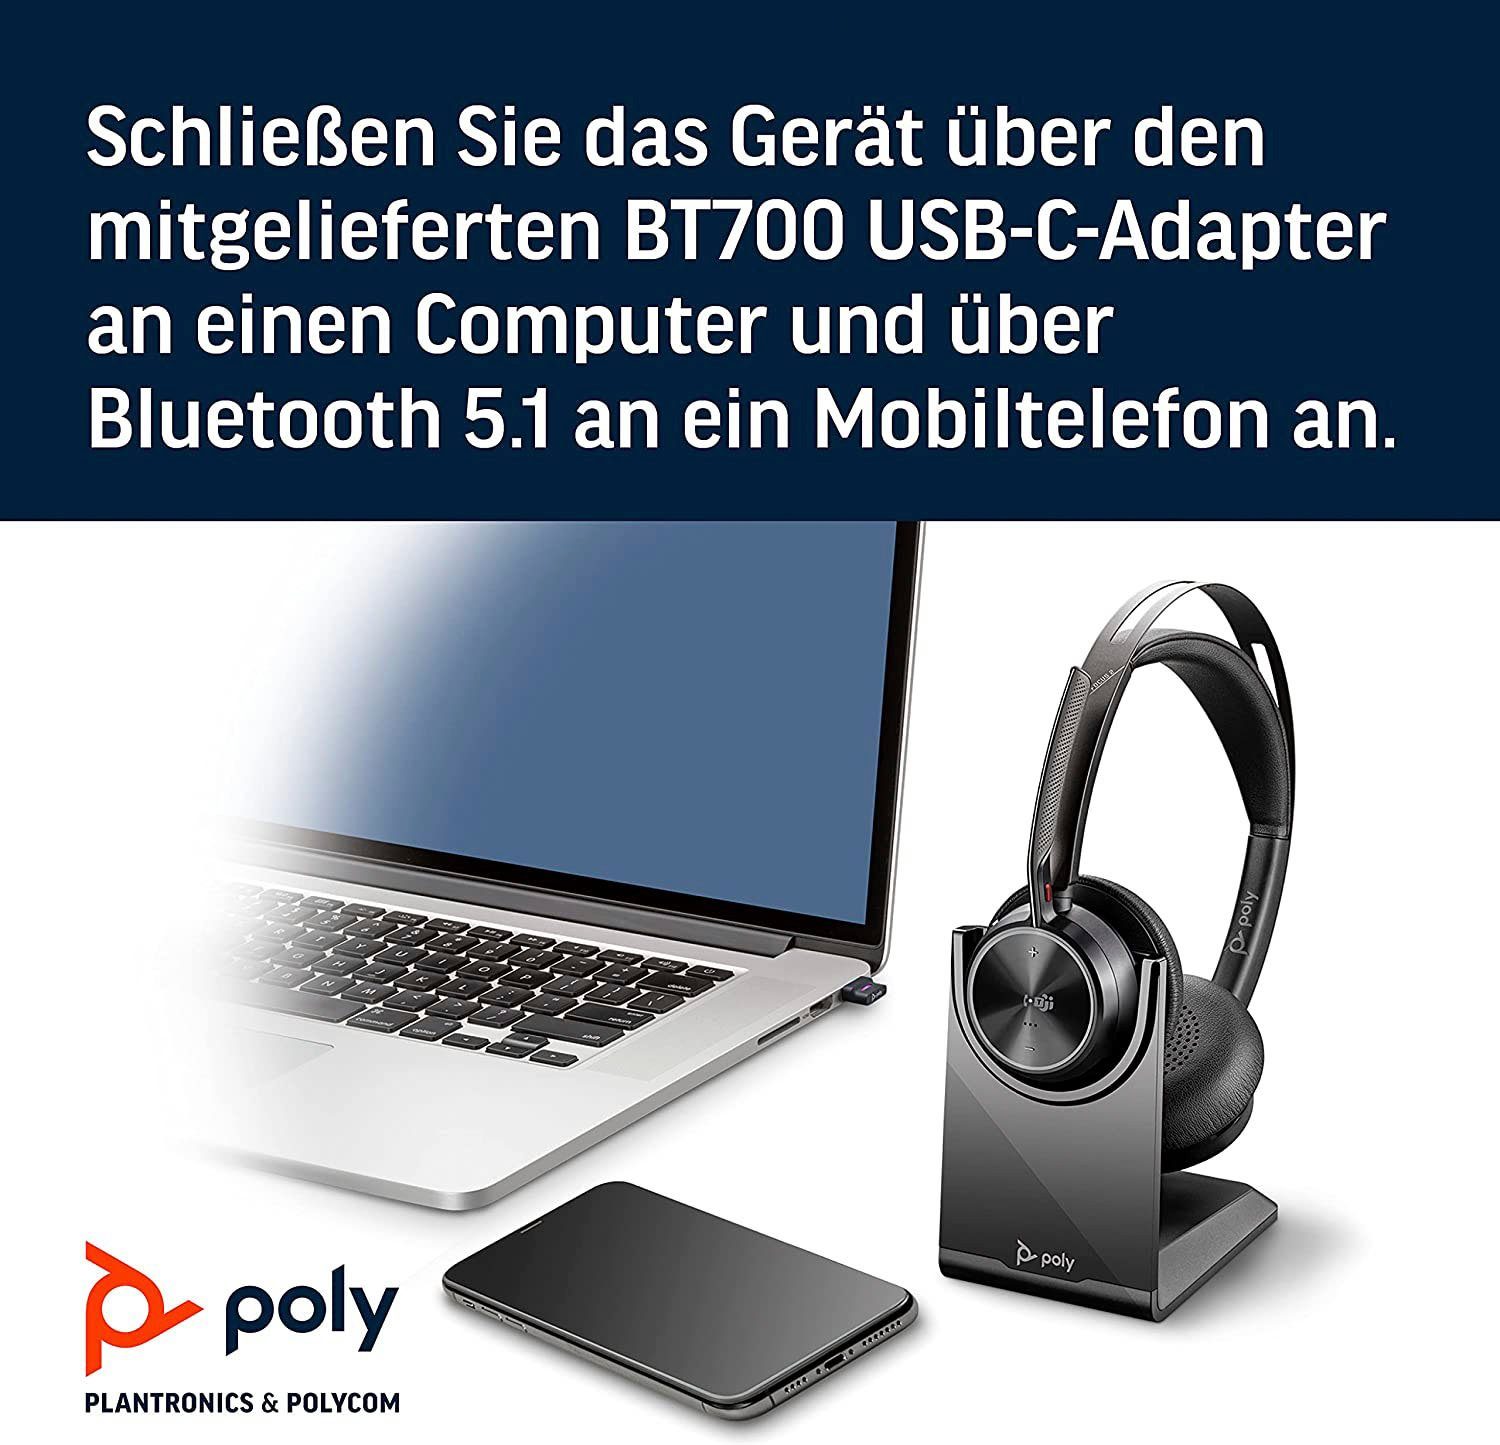 A2DP Bluetooth Audio (ANC), Control Poly (Advanced Profile), Musik, Distribution Remote (Active (Audio Cancelling HSP) und Wireless-Headset Video Bluetooth Profile), Voyager AVRCP für Noise integrierte Steuerung UC 2 Anrufe HFP, Focus